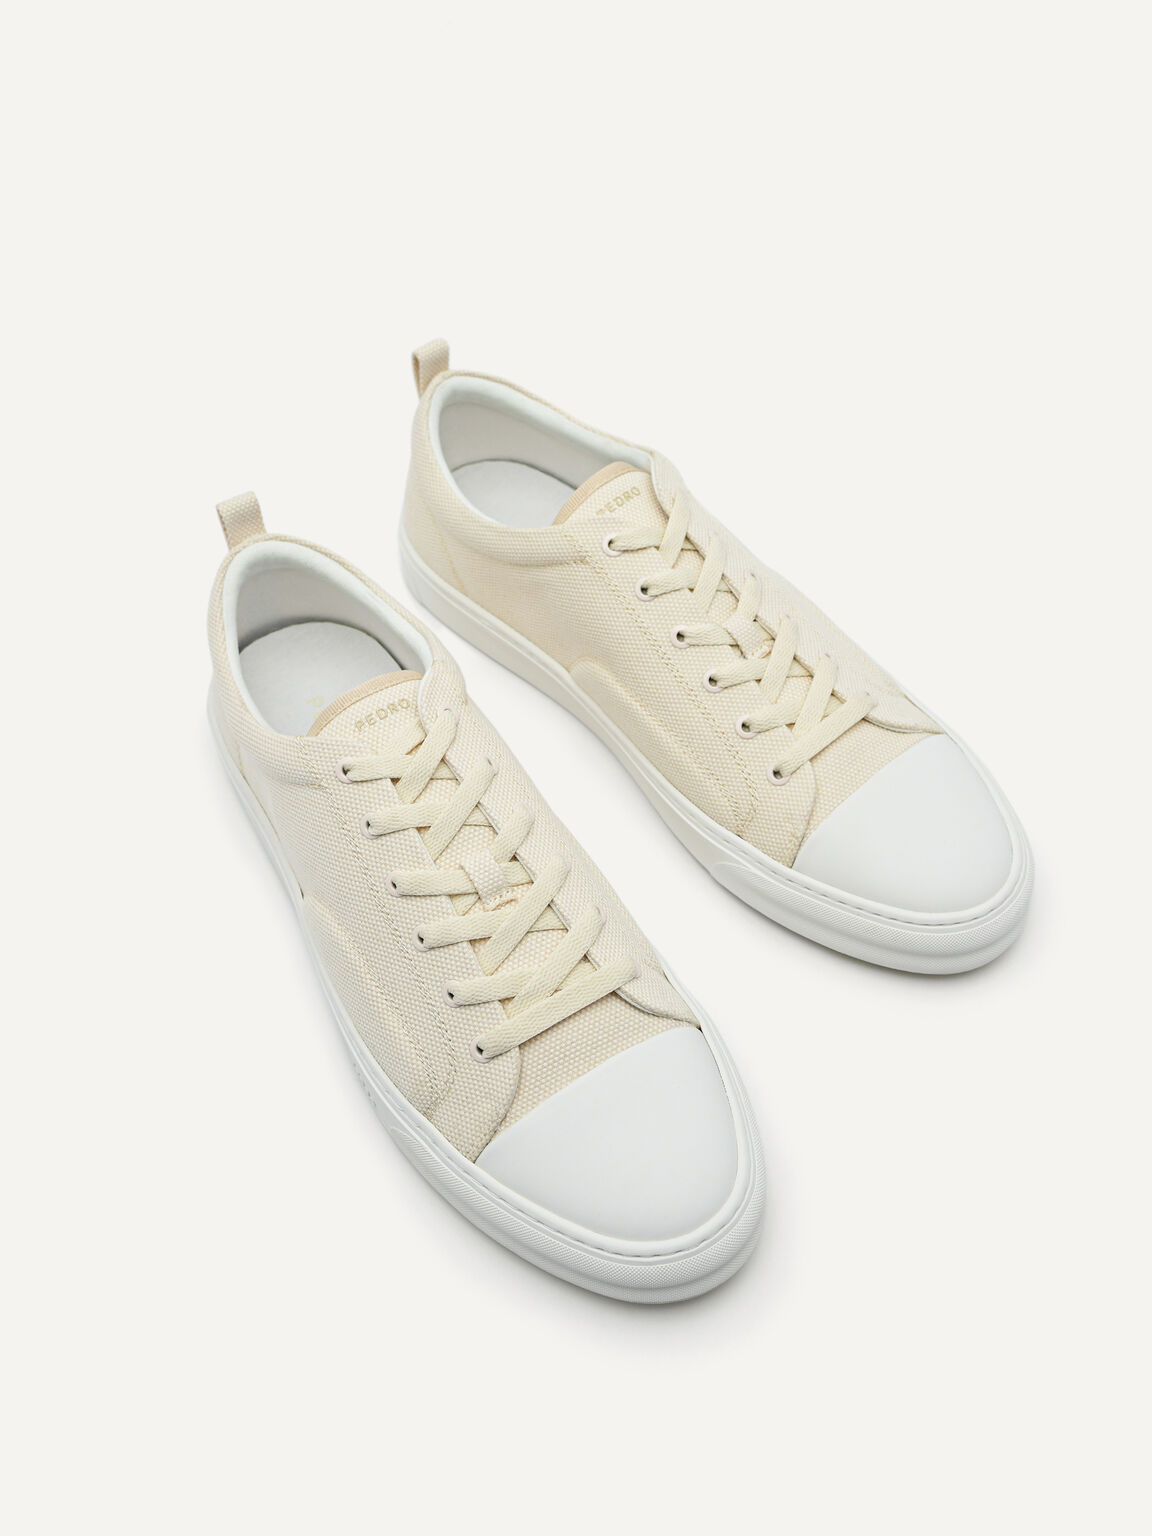 Lace-Up Sneakers, Beige